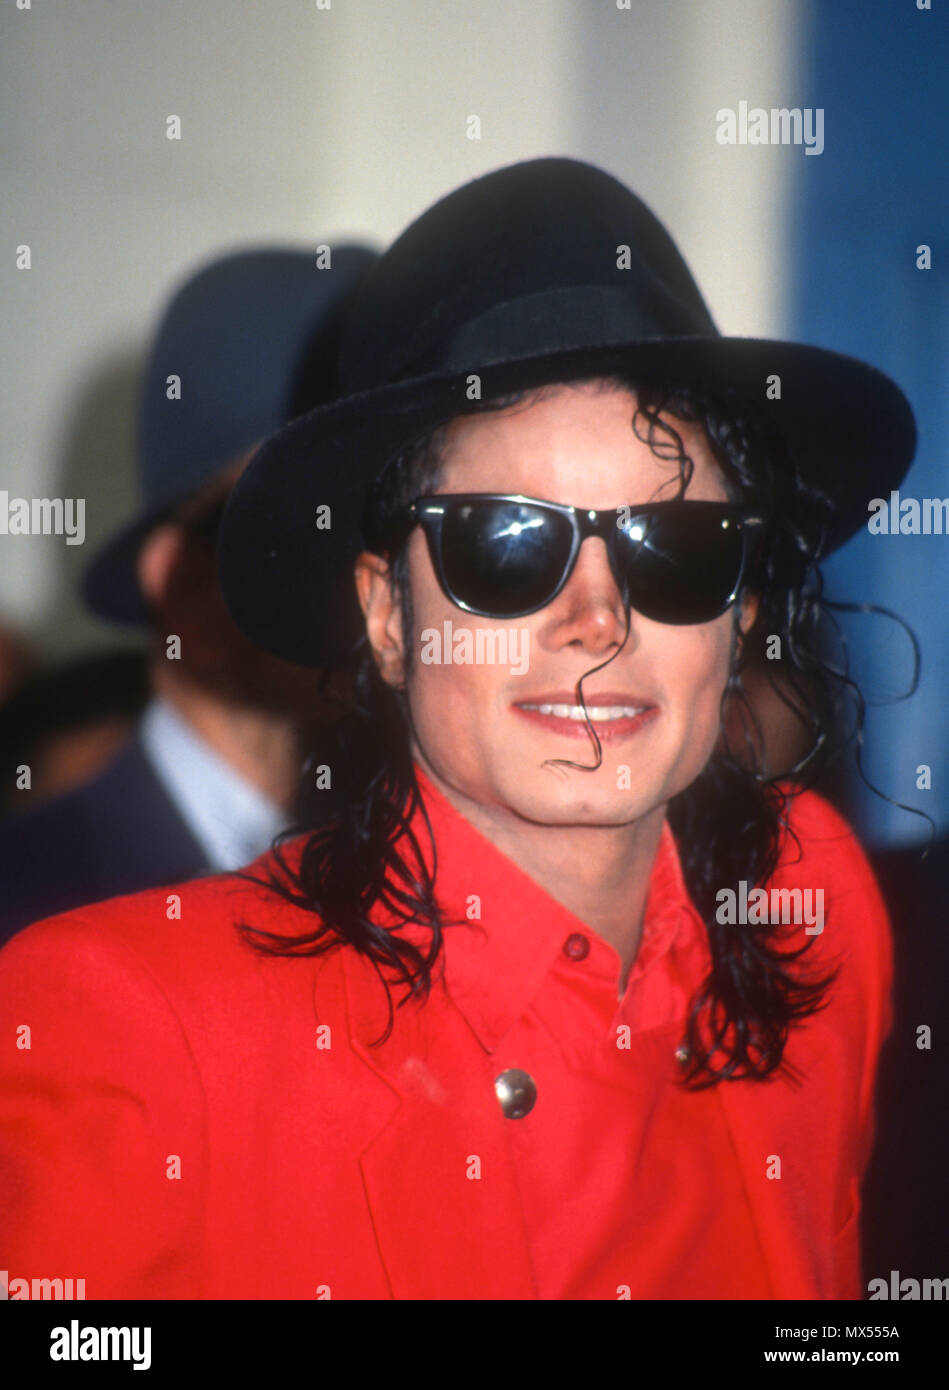 los-angeles-ca-july-26-singer-michael-jackson-visits-the-community-youth-sports-arts-foundation-on-july-26-1991in-los-angeles-california-photo-by-barry-kingalamy-stock-photo-MX555A.jpg